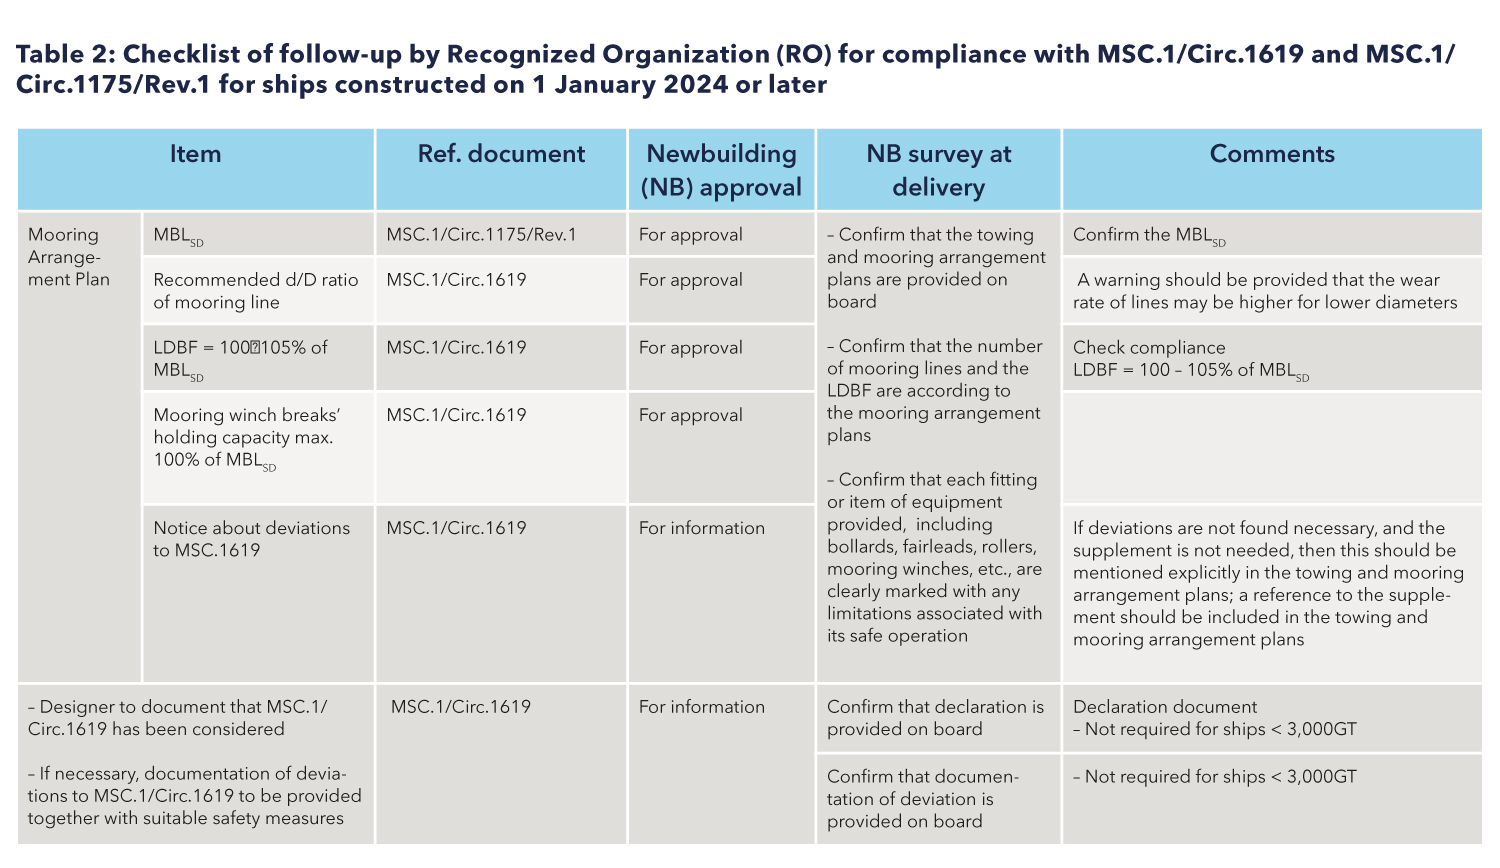 Table 2: Checklist of follow-up by Recognized Organization (RO) for compliance with MSC.1/Circ.1619 and MSC.1/ Circ.1175/Rev.1 for ships constructed on 1 January 2024 or later